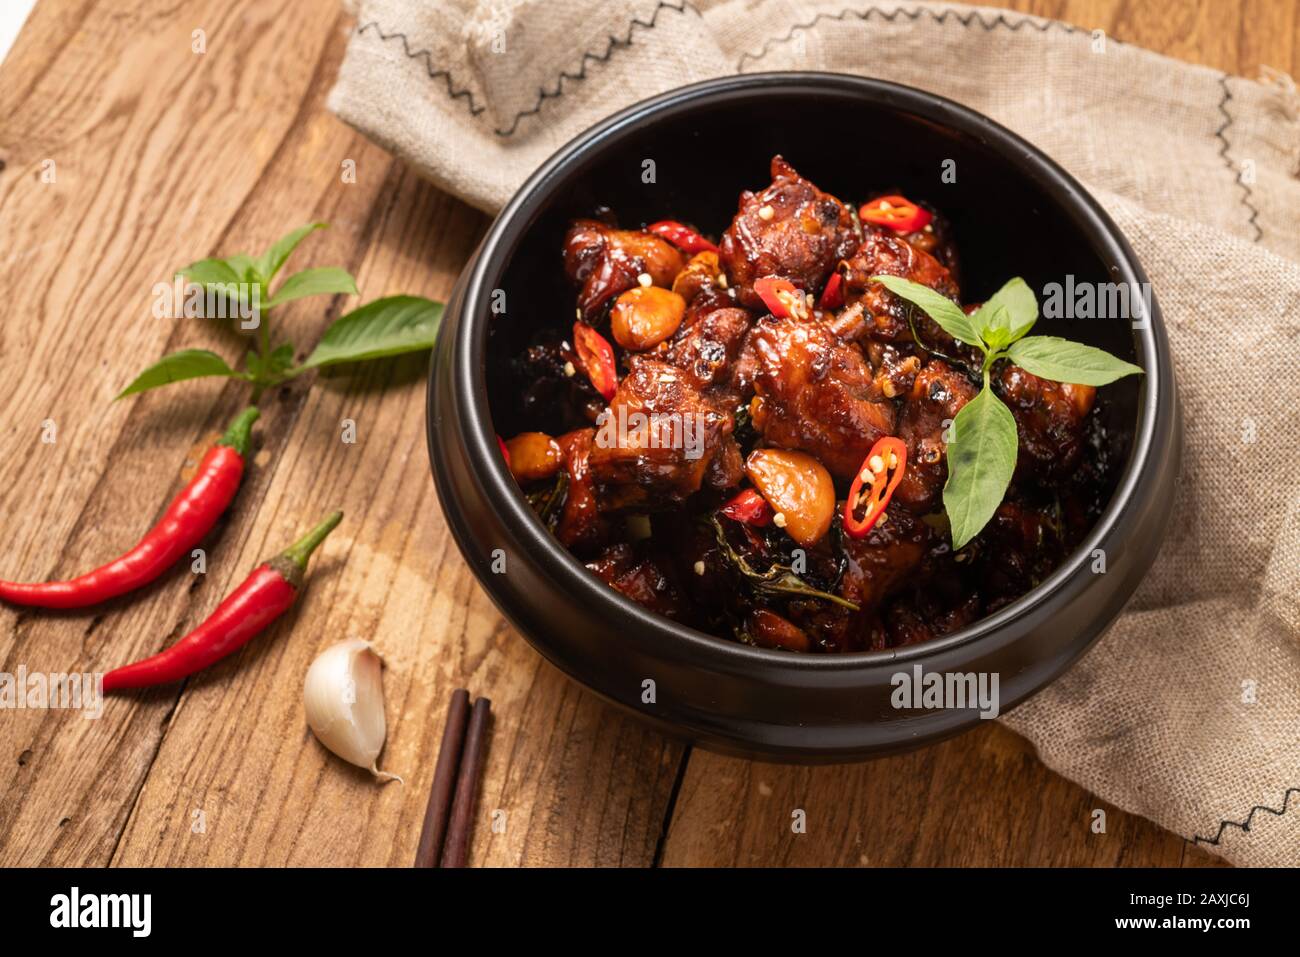 Delicious traditional Chinese three cups chicken dish. Stock Photo